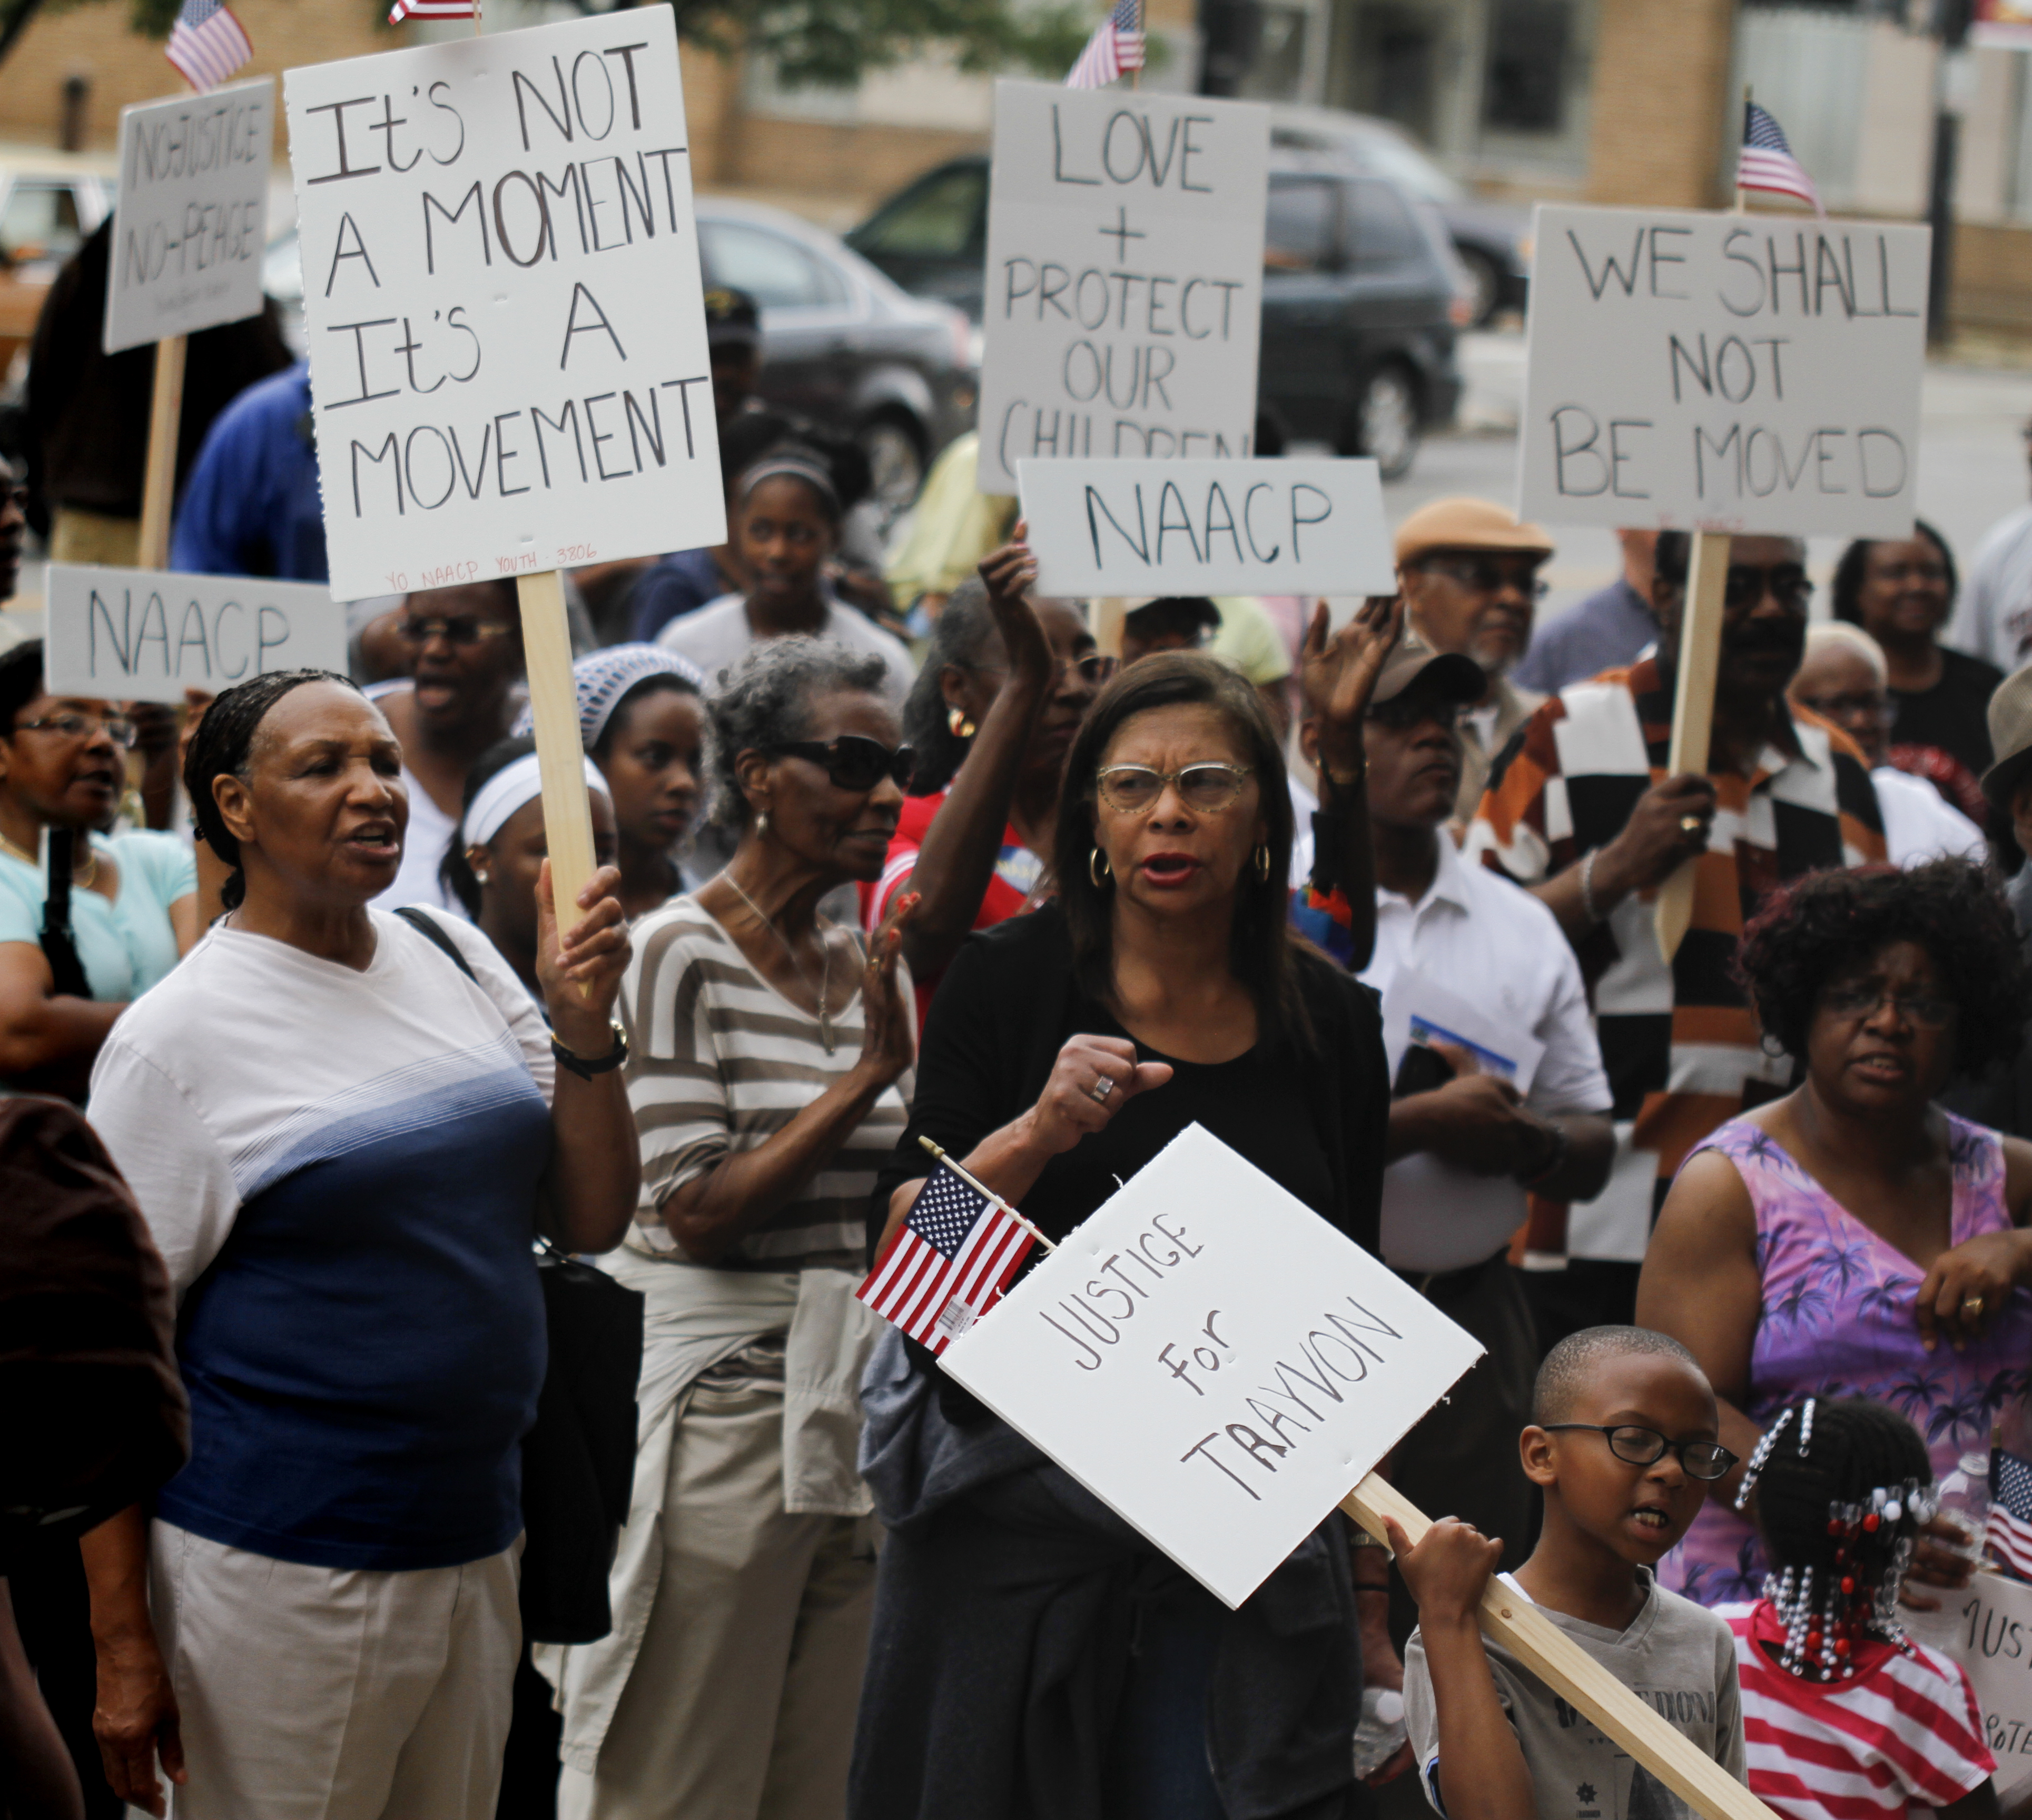 MADELYN P. HASTINGS | THE VINDICATOR

A "Justice for Trayvon" rally was held in reaction to the Zimmerman verdict on the steps of the Mahoning County Courthouse on Saturday, July 20.  